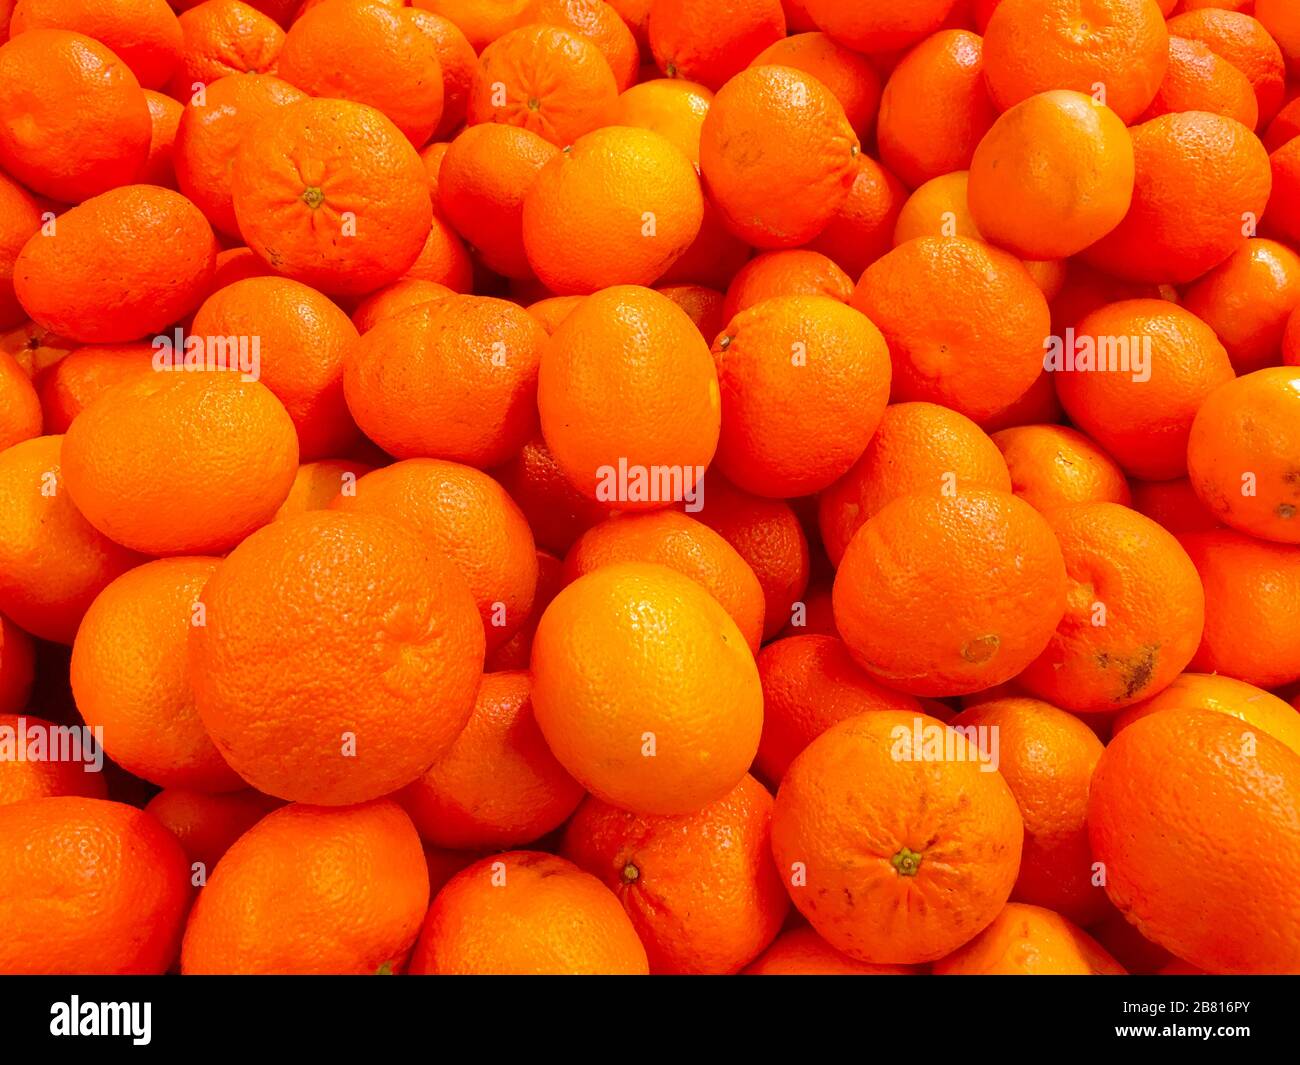 Fresh ripe mandarin oranges (clementine, tangerine) with green leaves on  retail market display, close up, high angle view Stock Photo - Alamy